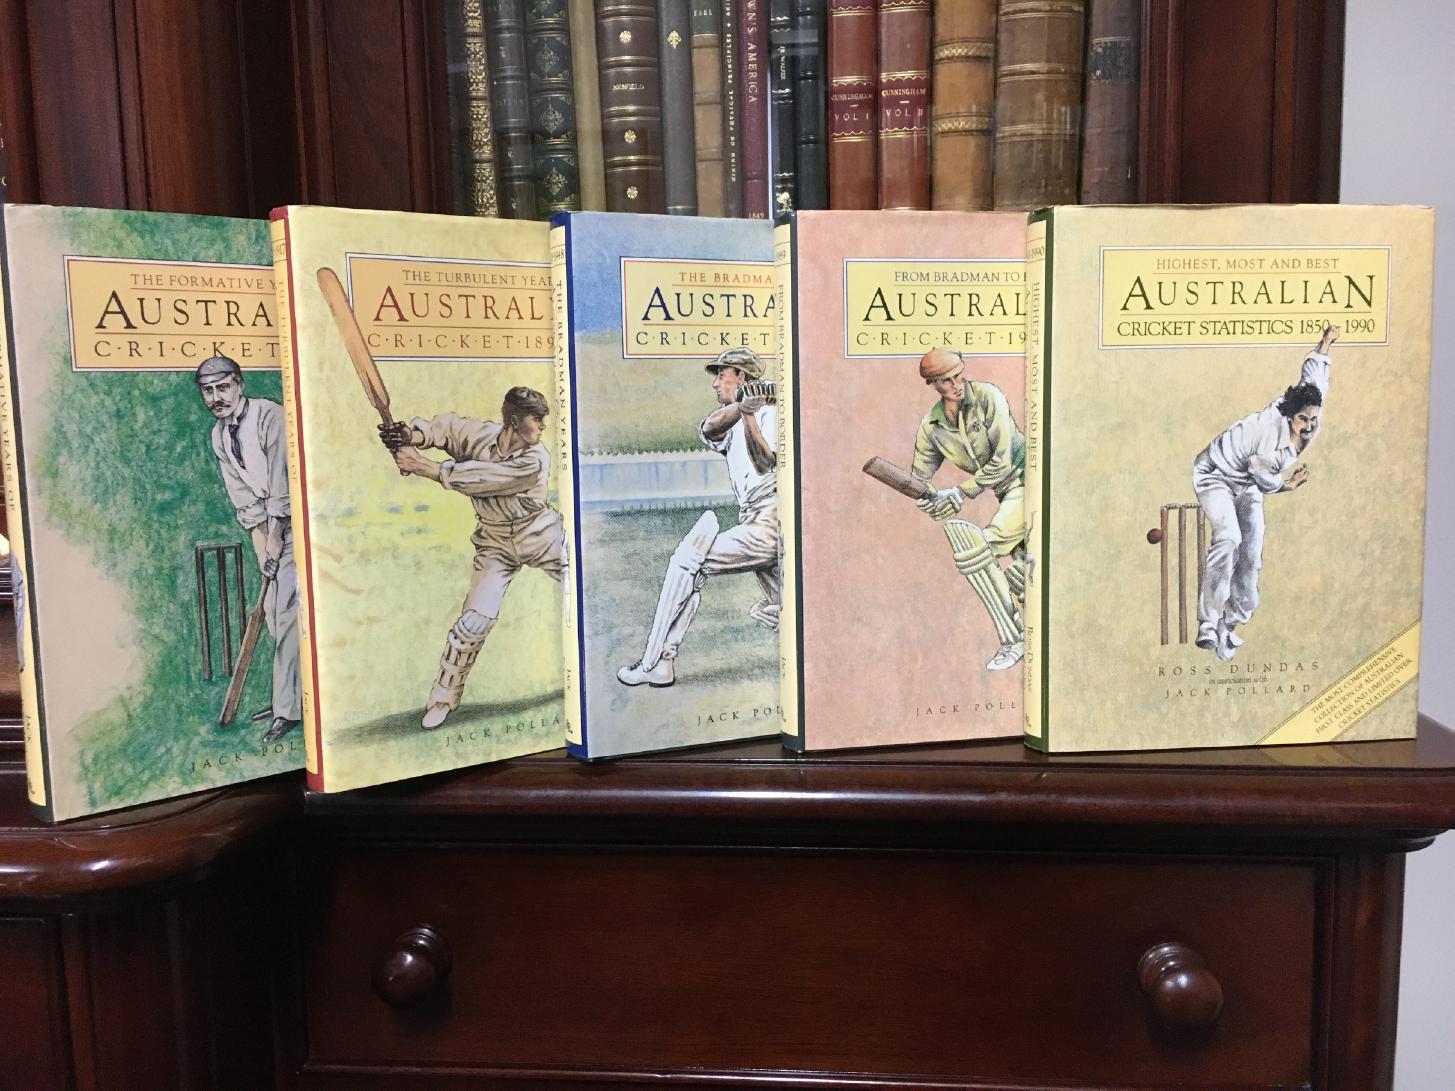 POLLARD, JACK. - The Complete History of Australian Cricket. Five Volume Set. The Formative Years 1803-1893. The Turbulent Years 1893-1917. The Bradman Years 1918-1948. The Packer Years 1948-1995. Highest, Most and Best, 192 Years of Cricket Statistics.